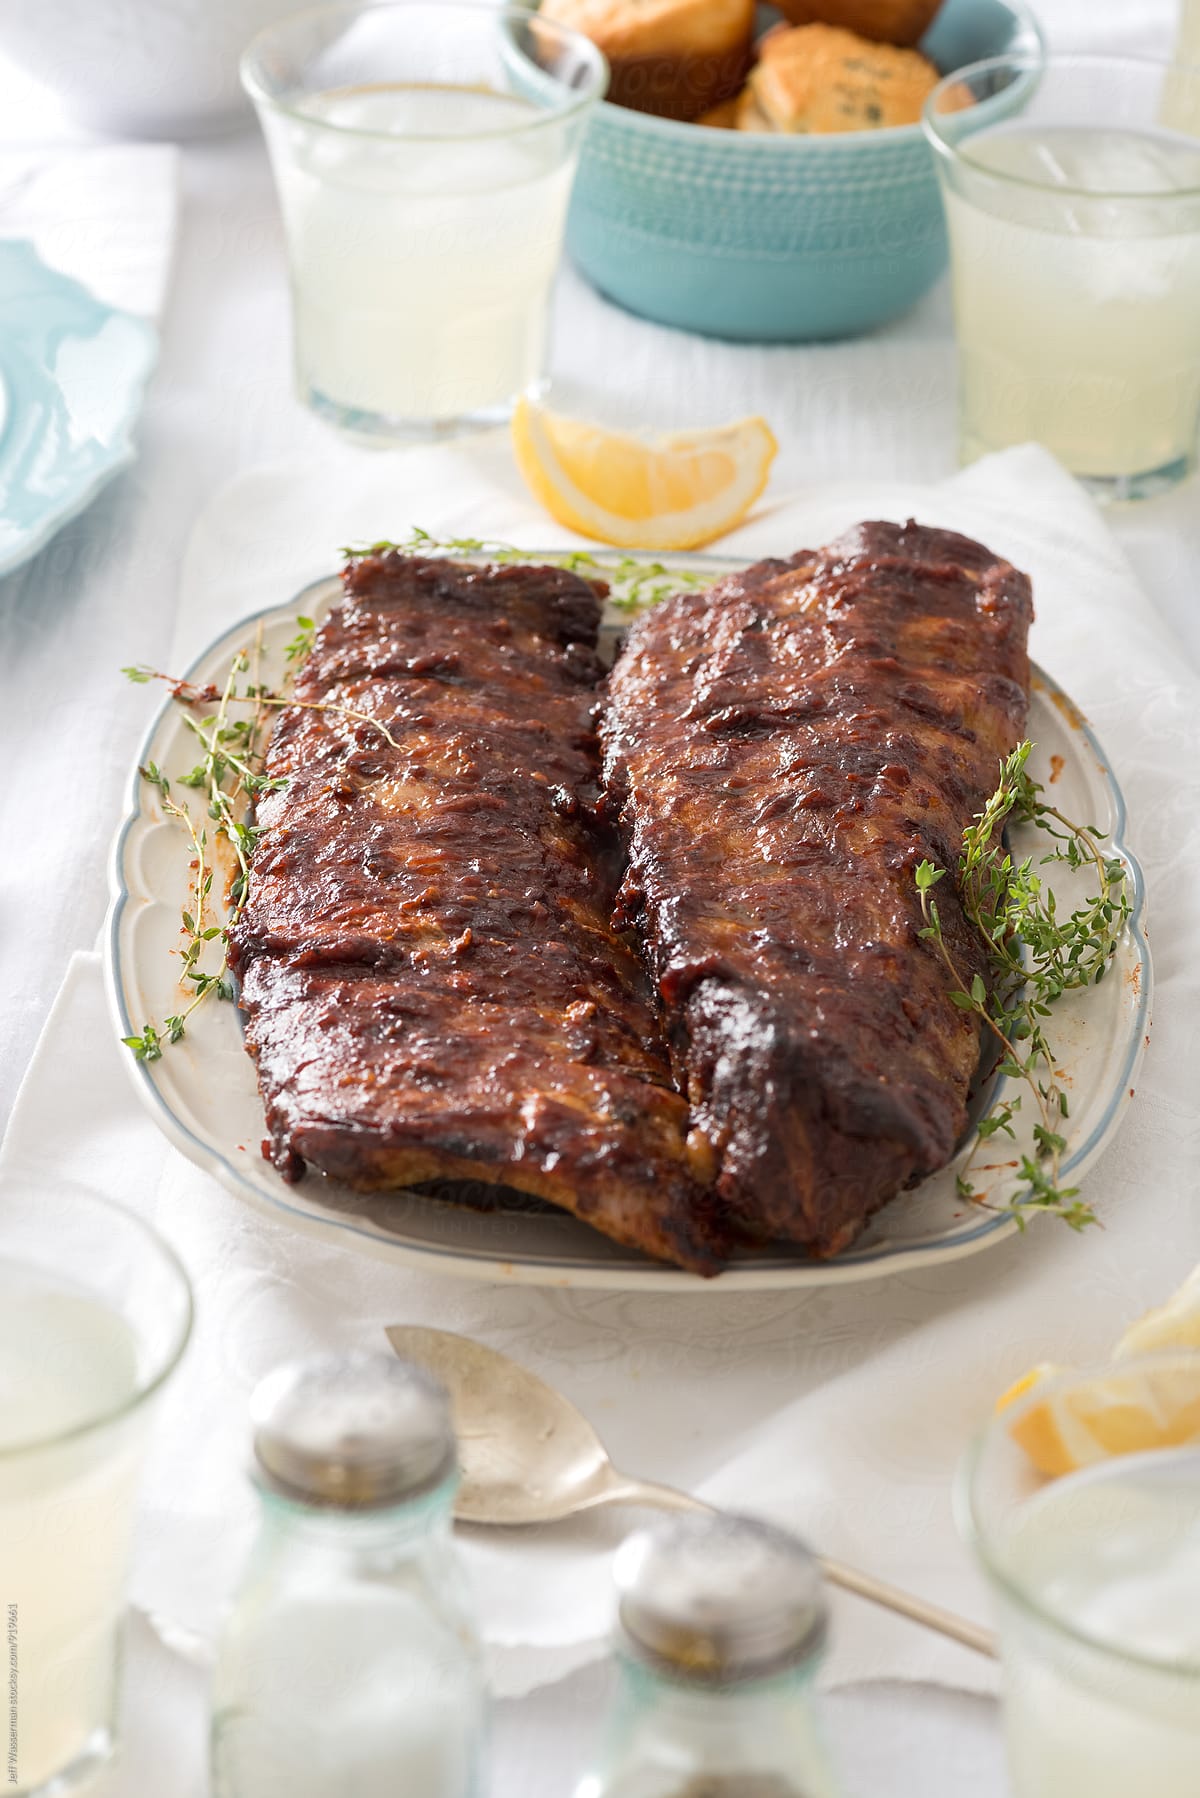 Barbecue Ribs and Corn Dinner Party: Rack of Ribs